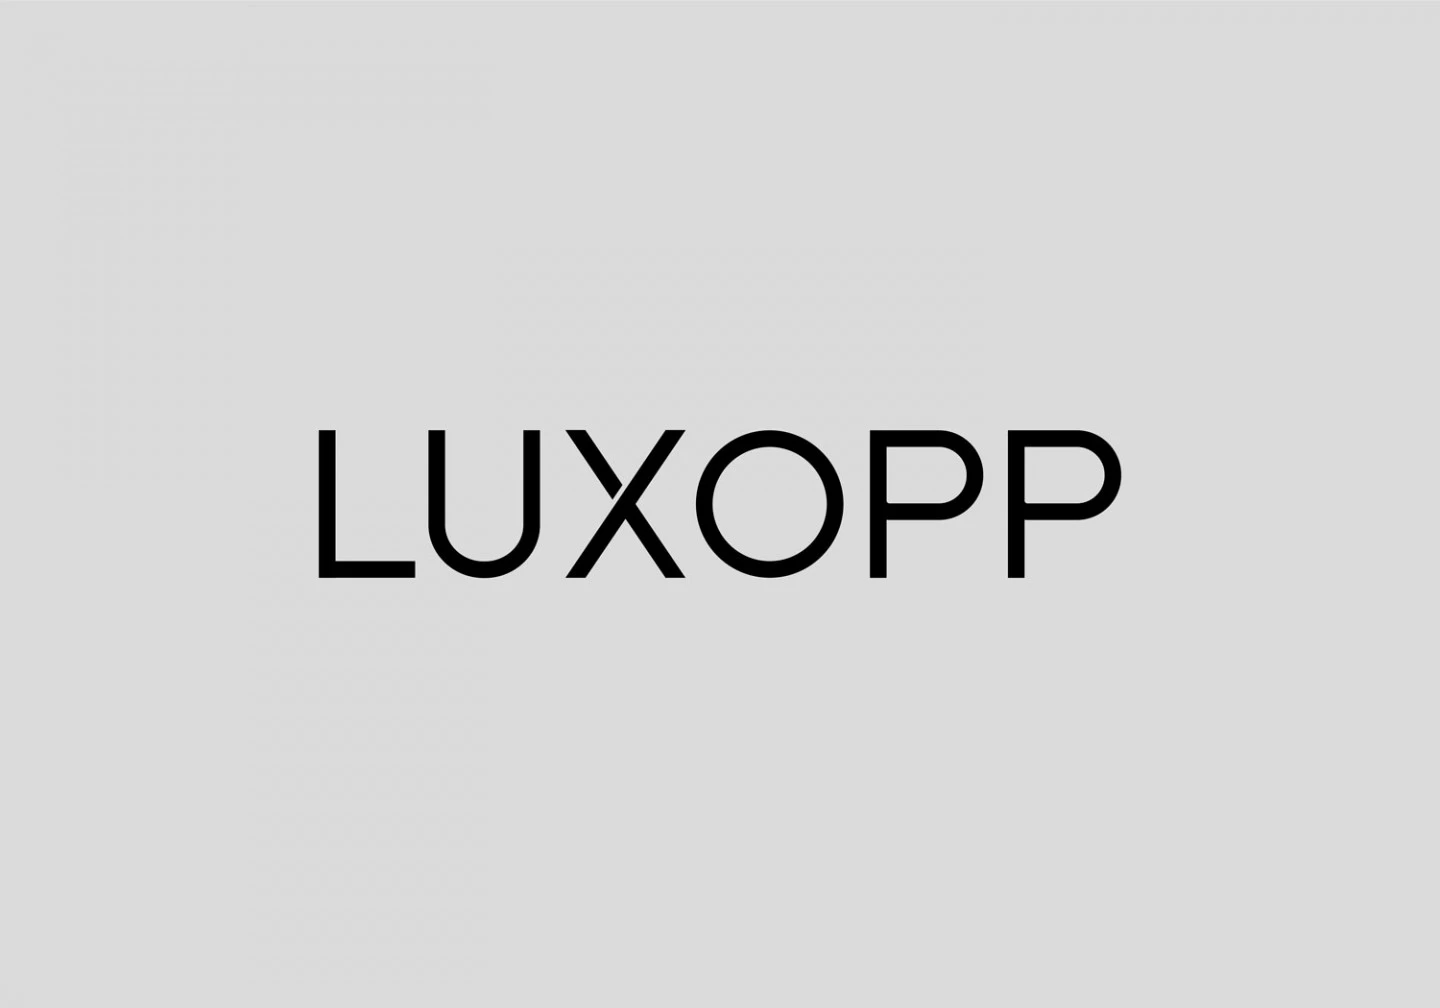 LUXOPP_cover_yiakidesign